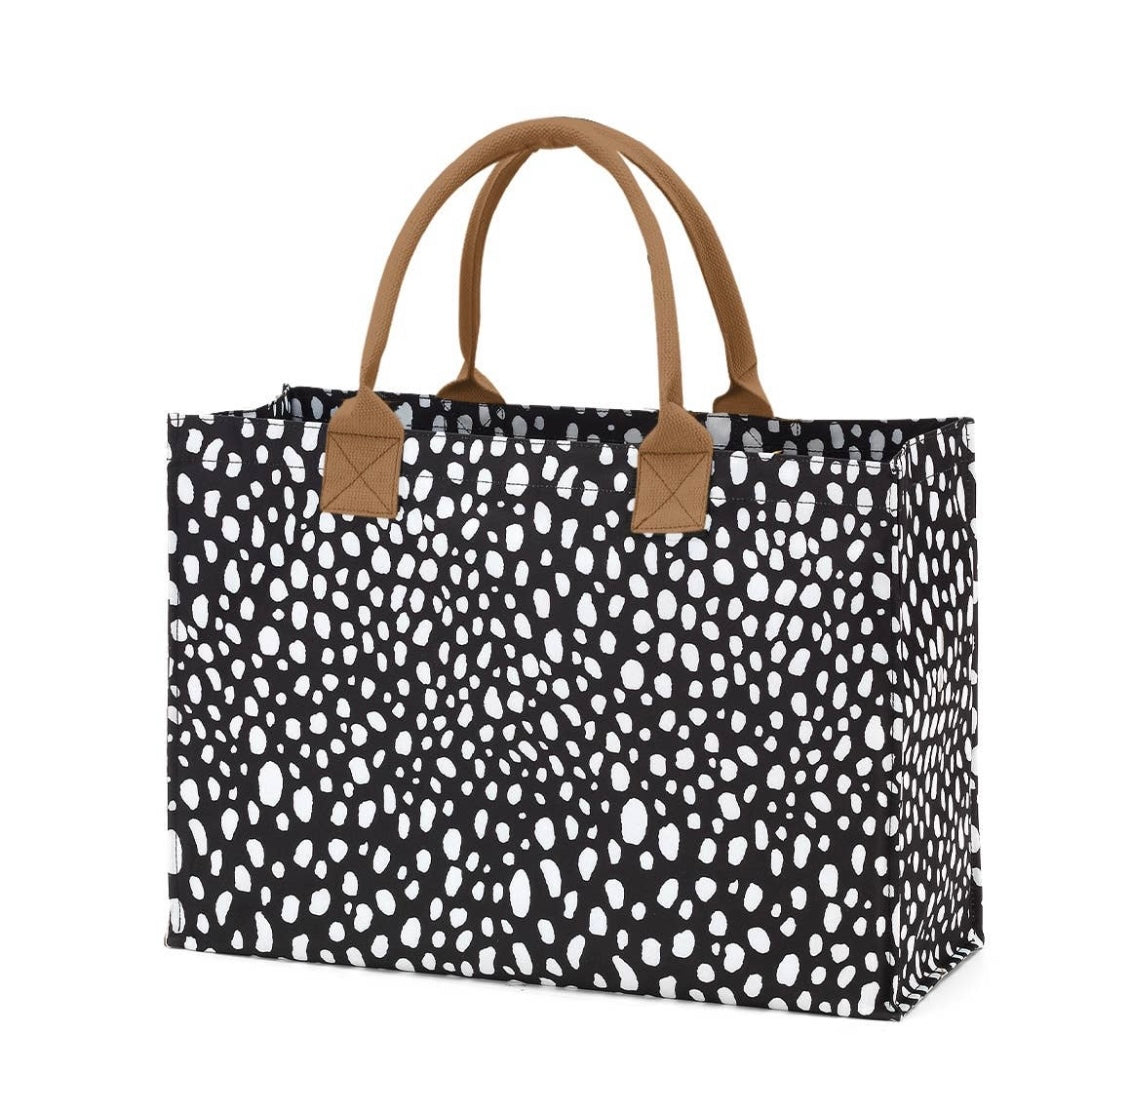 Spotted Tote Bag